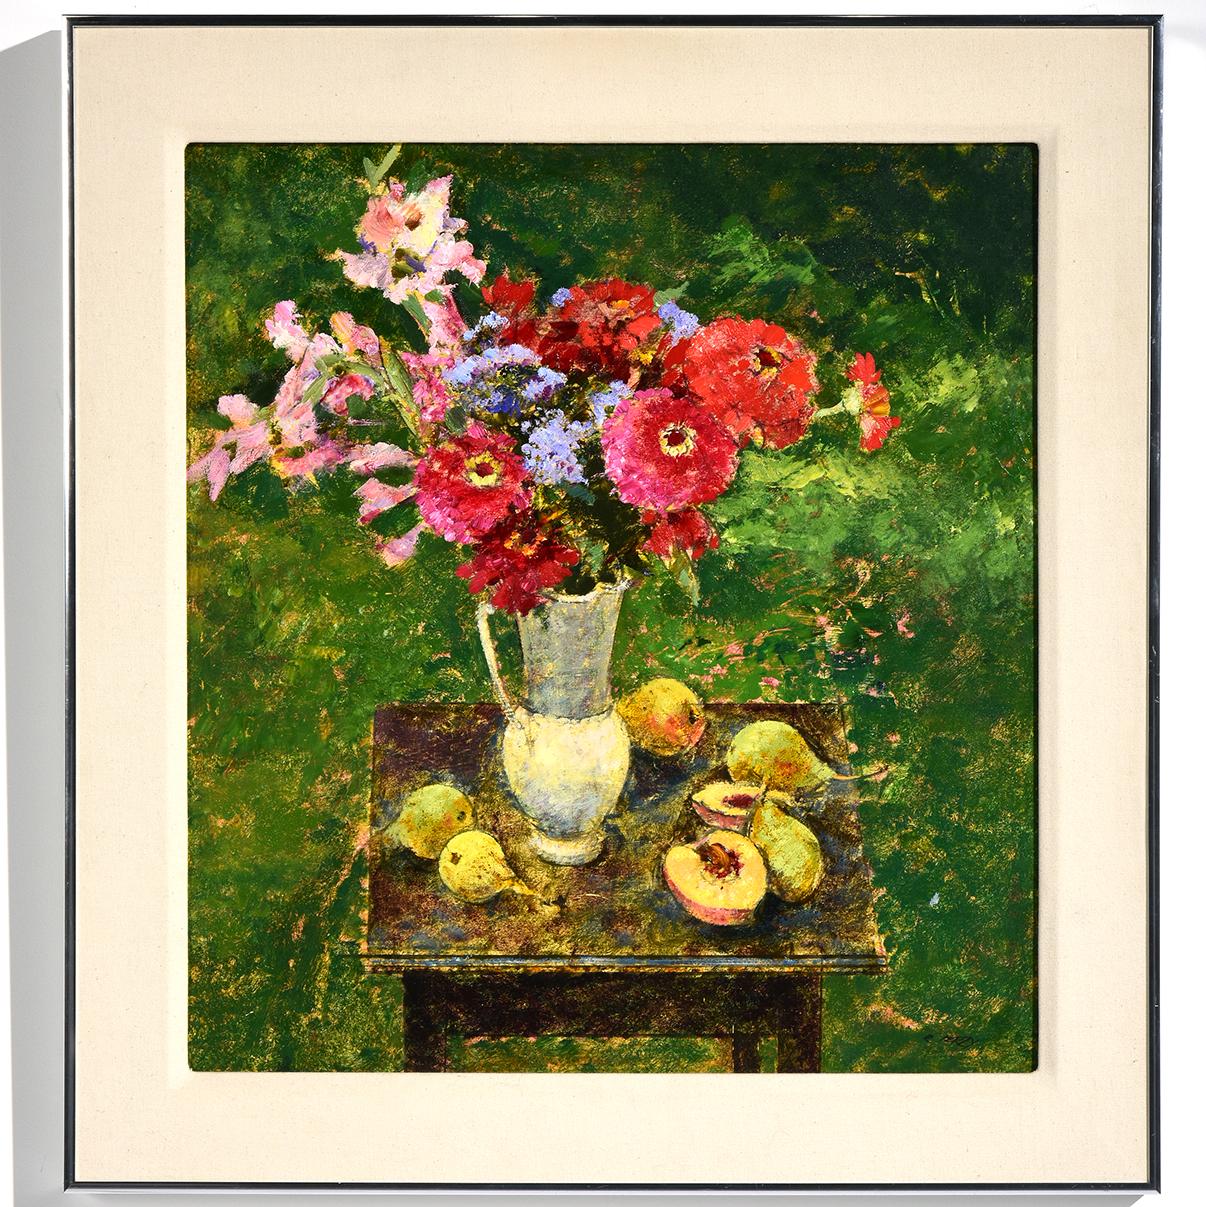 Richard Jerzy Landscape Painting - "Still Life with Fruit & Flowers"  Outdoors with Table & Flowers in Colors